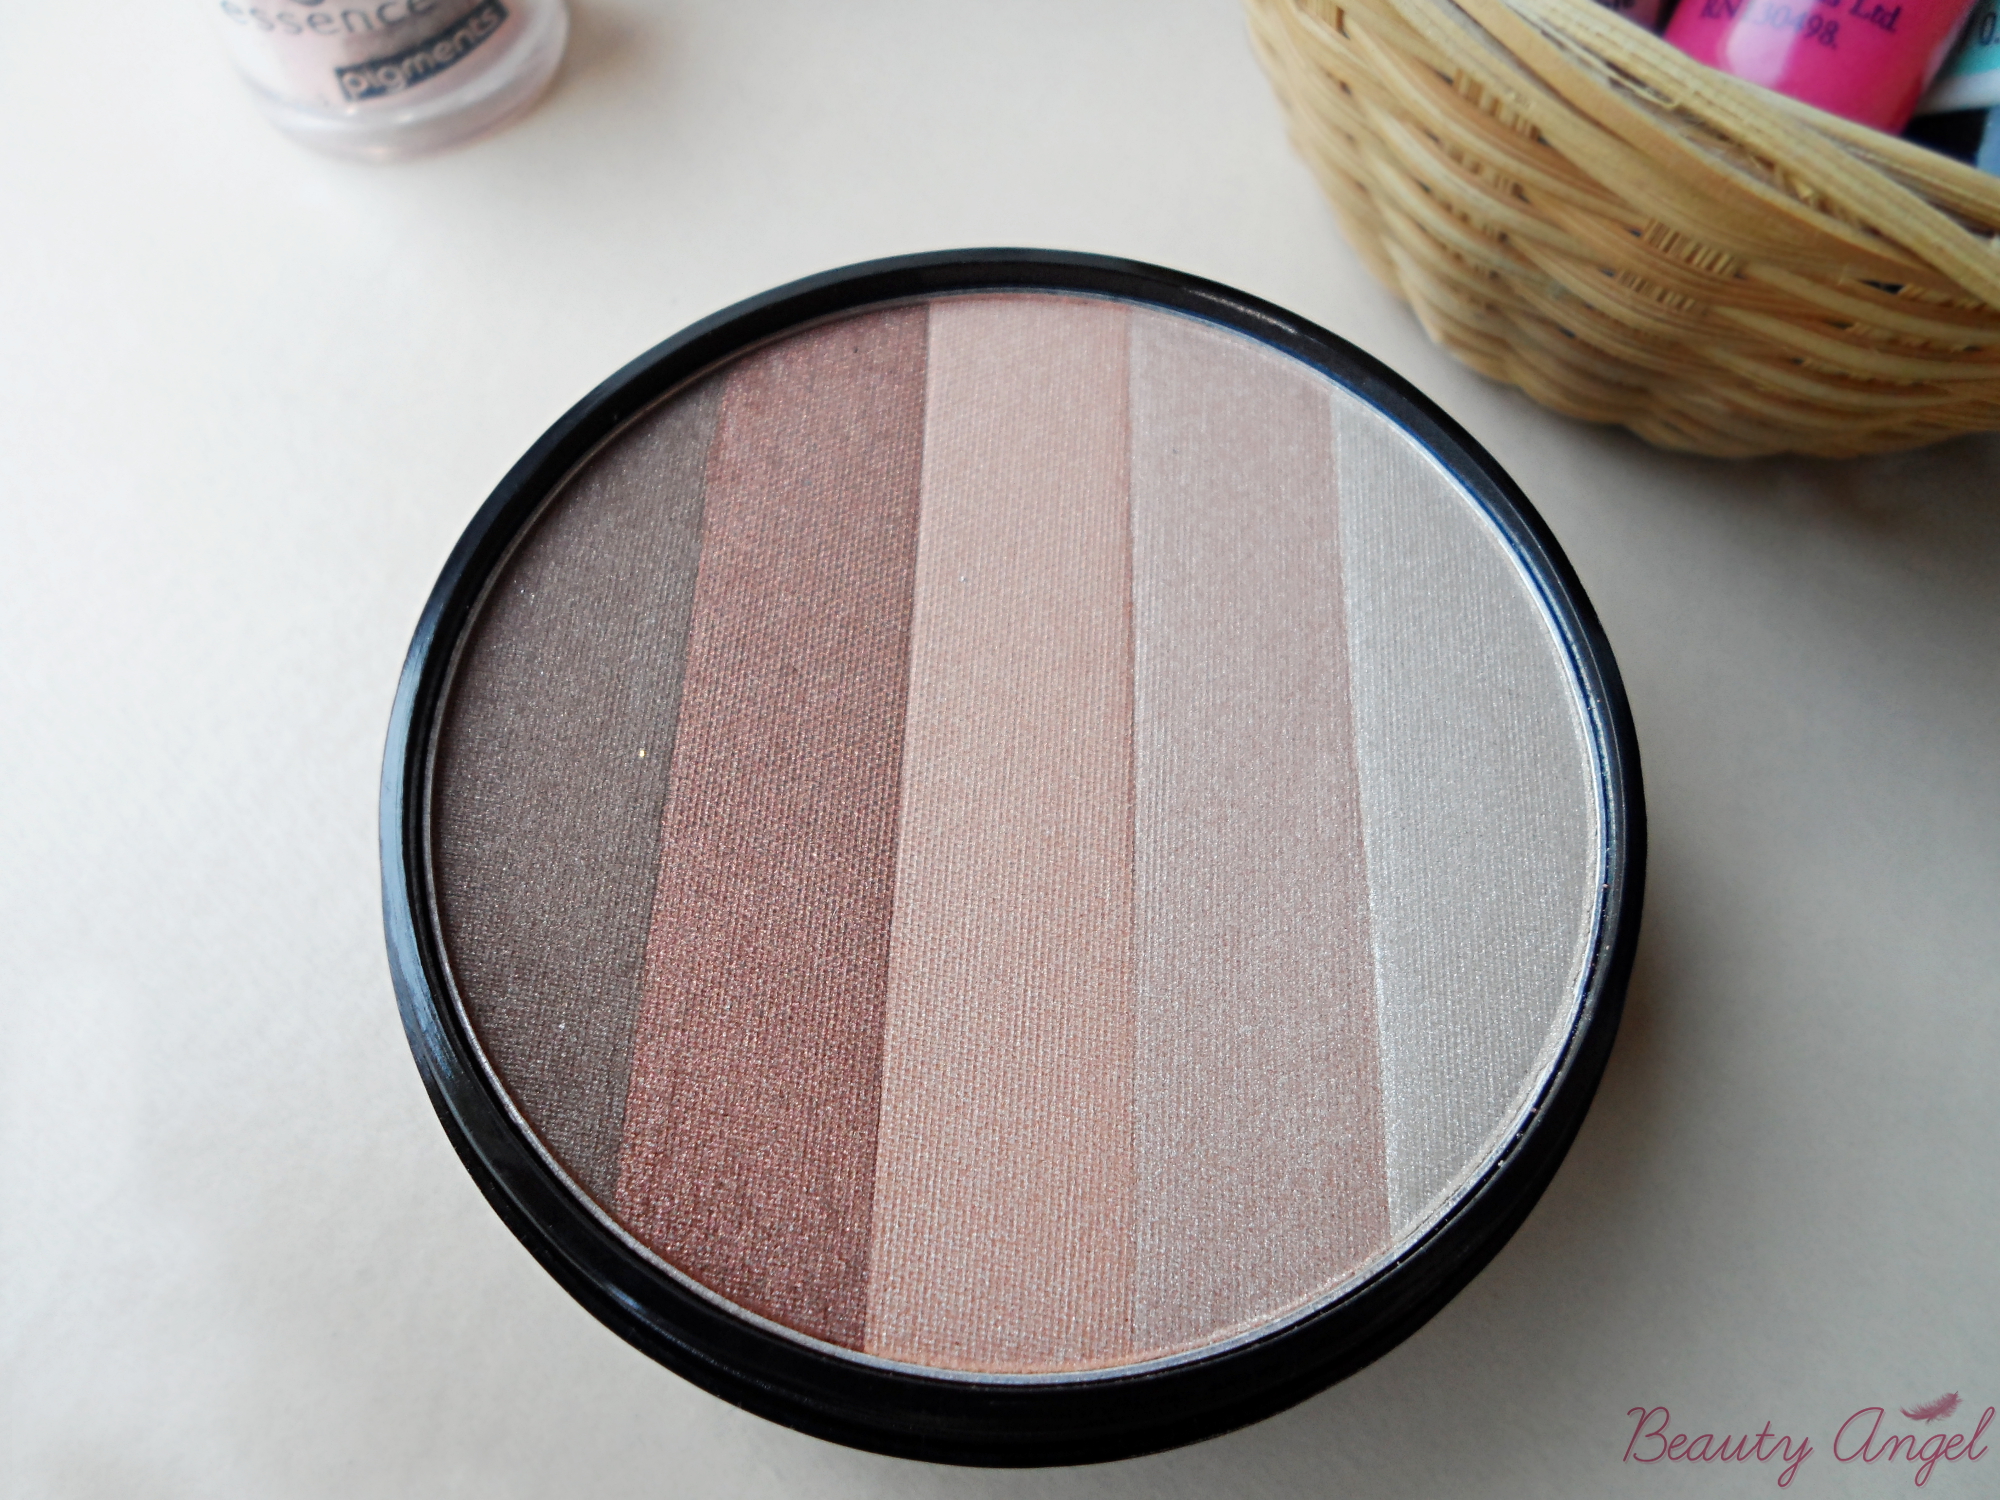 beauty uk makeup products review, swatches, and pictures by blogger